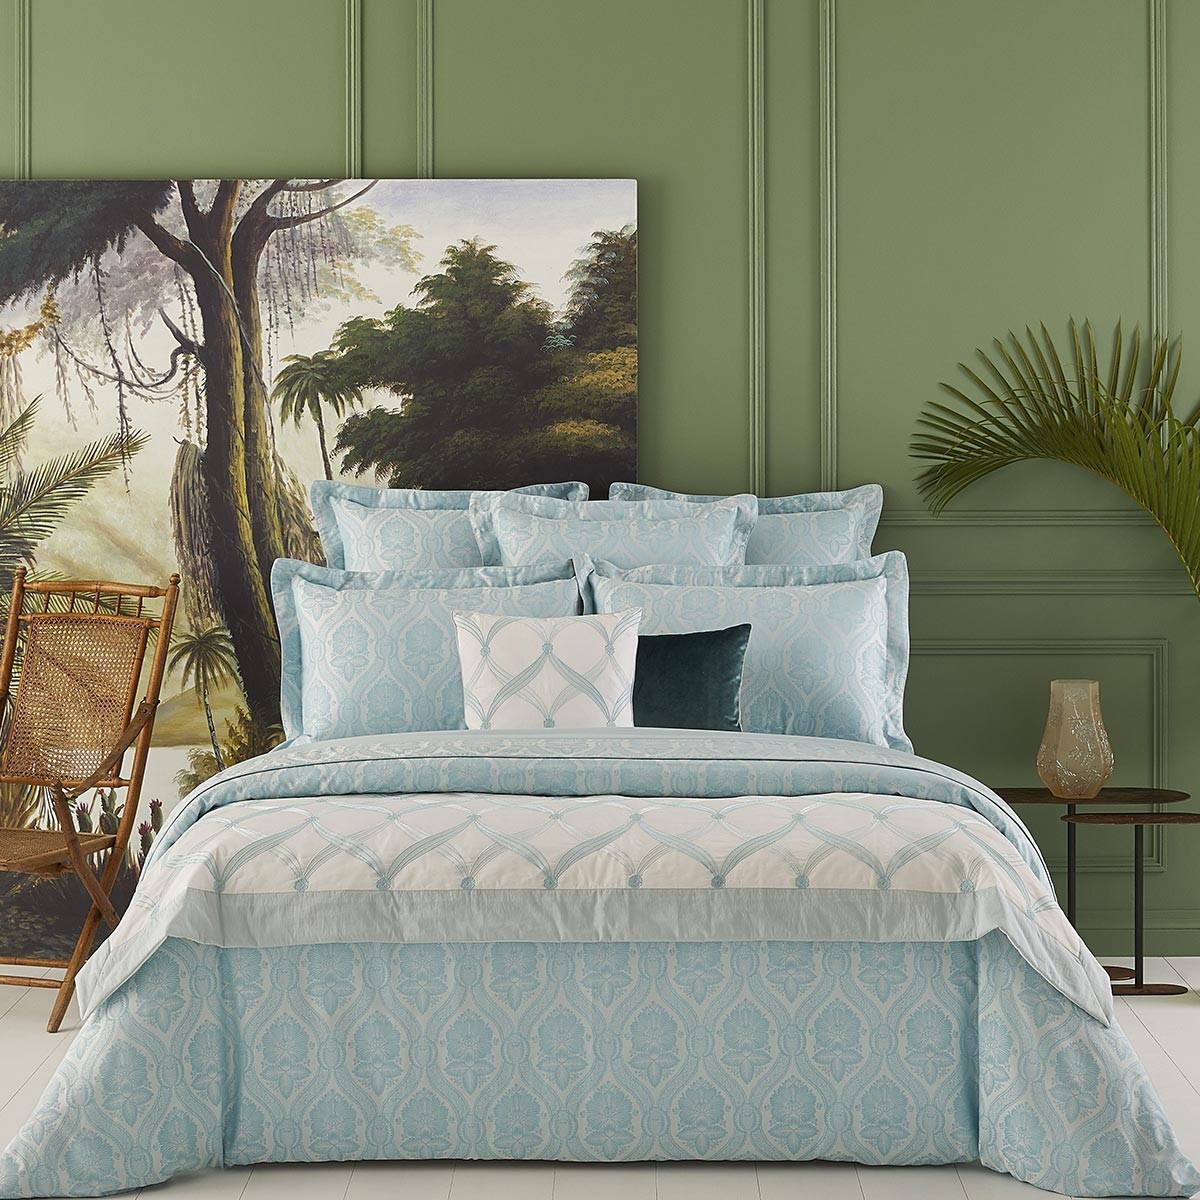 Embrace Nil Delorme Bed Yves Collection Tranquility | Bleu